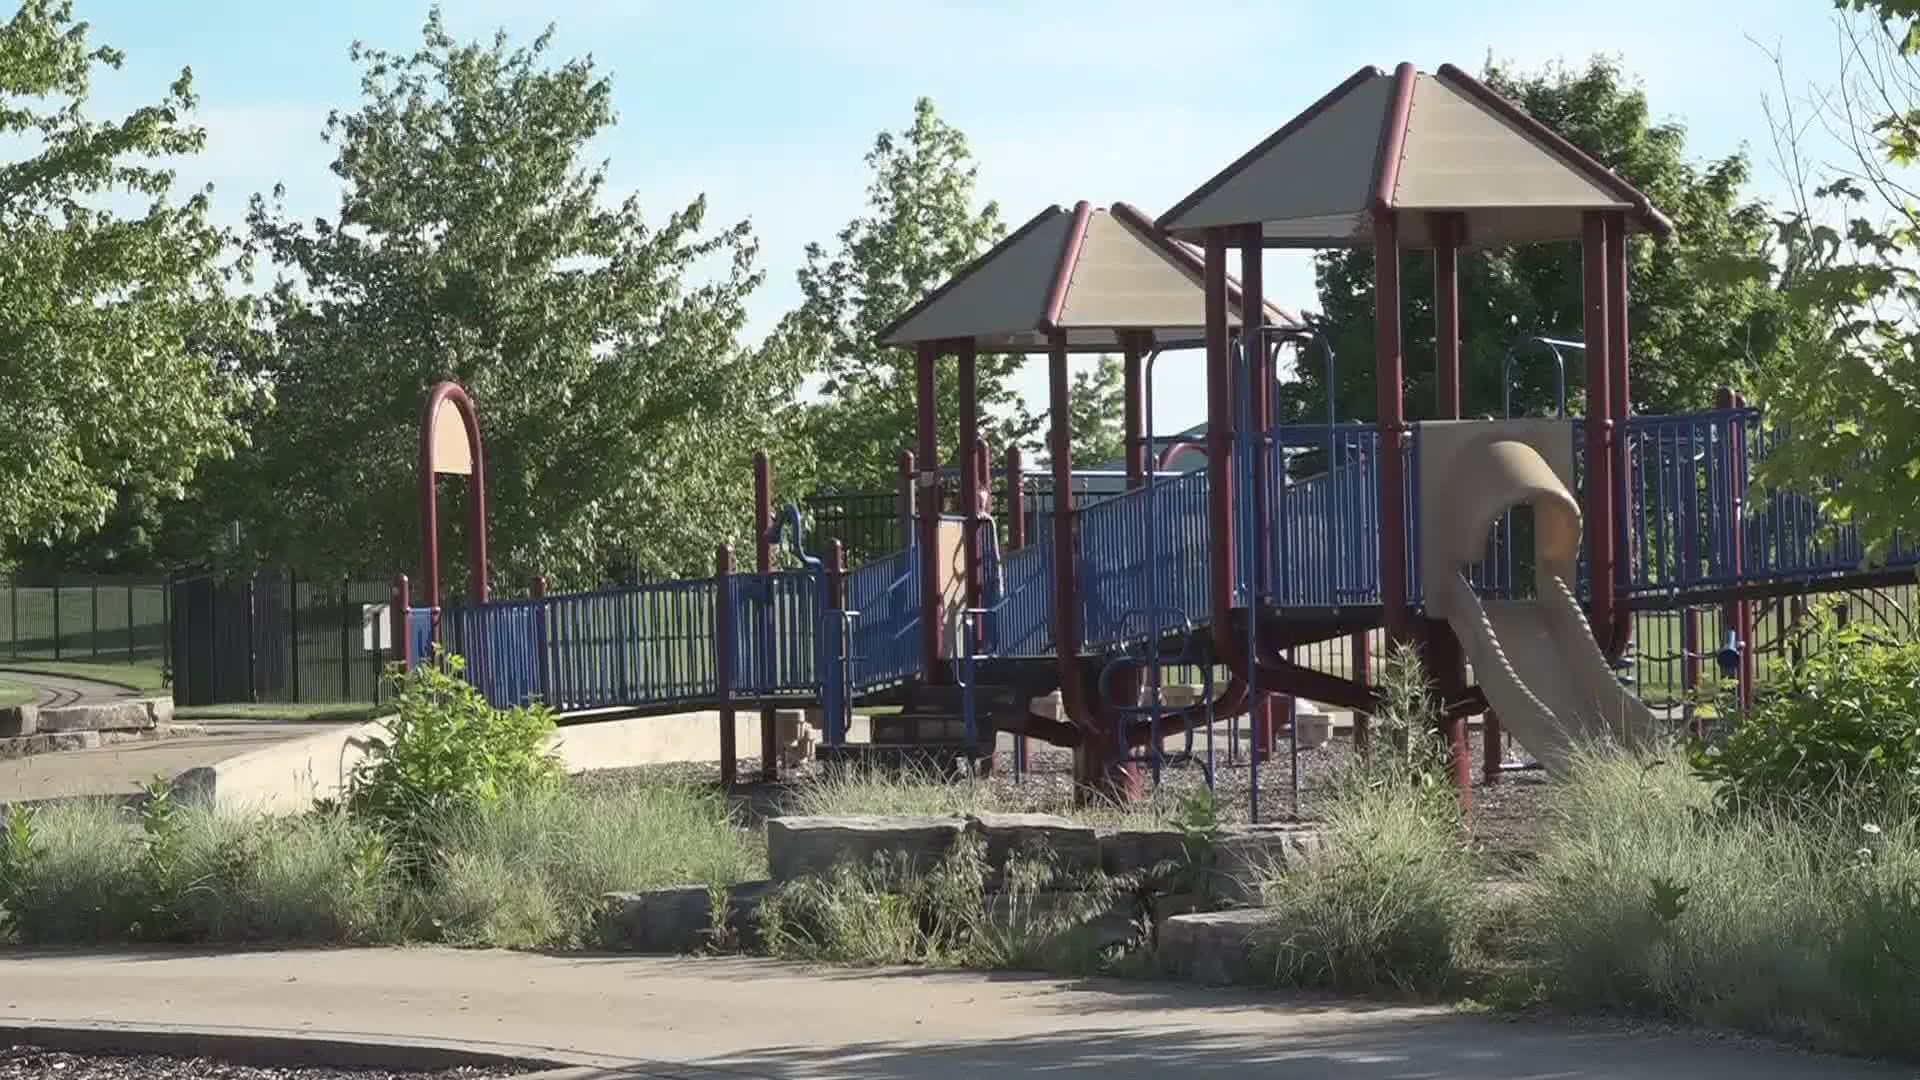 Even though things are still uncertain with the virus, epidemiologist Brian Hartl says visiting the playground is a safe activity.